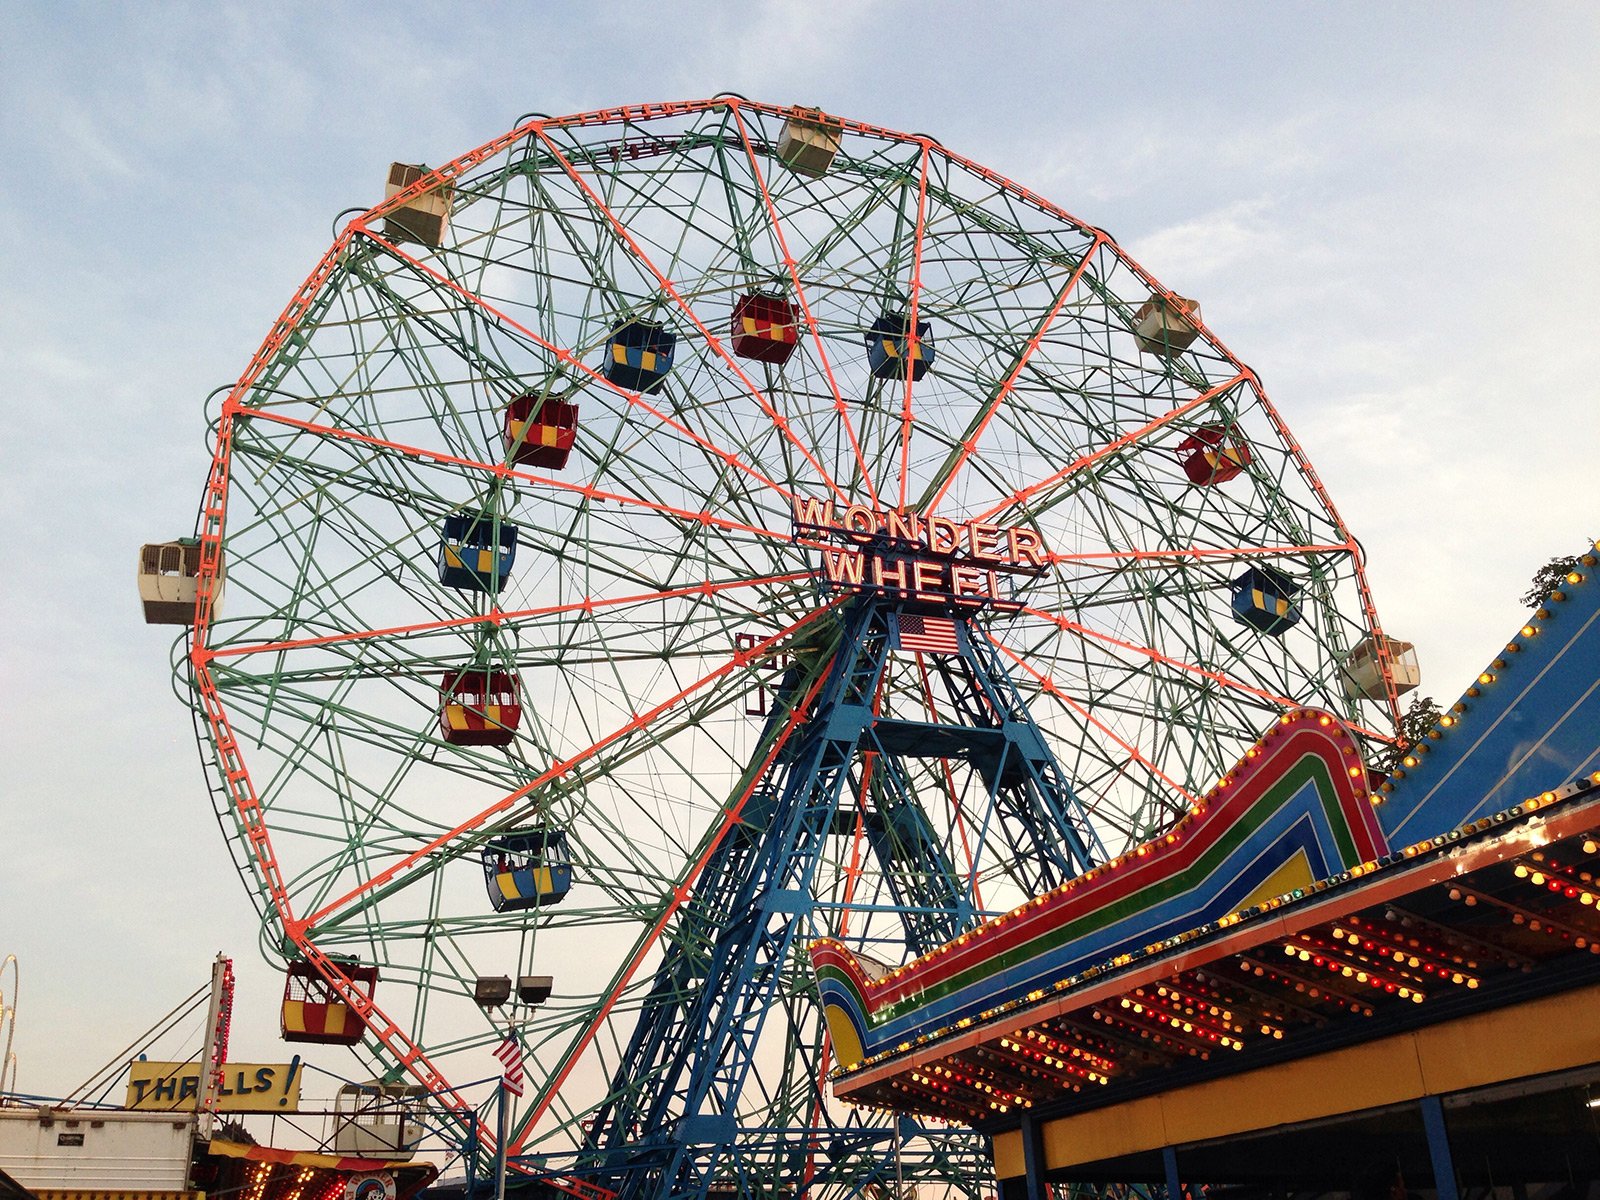 How to ride the Wonder Wheel in New York